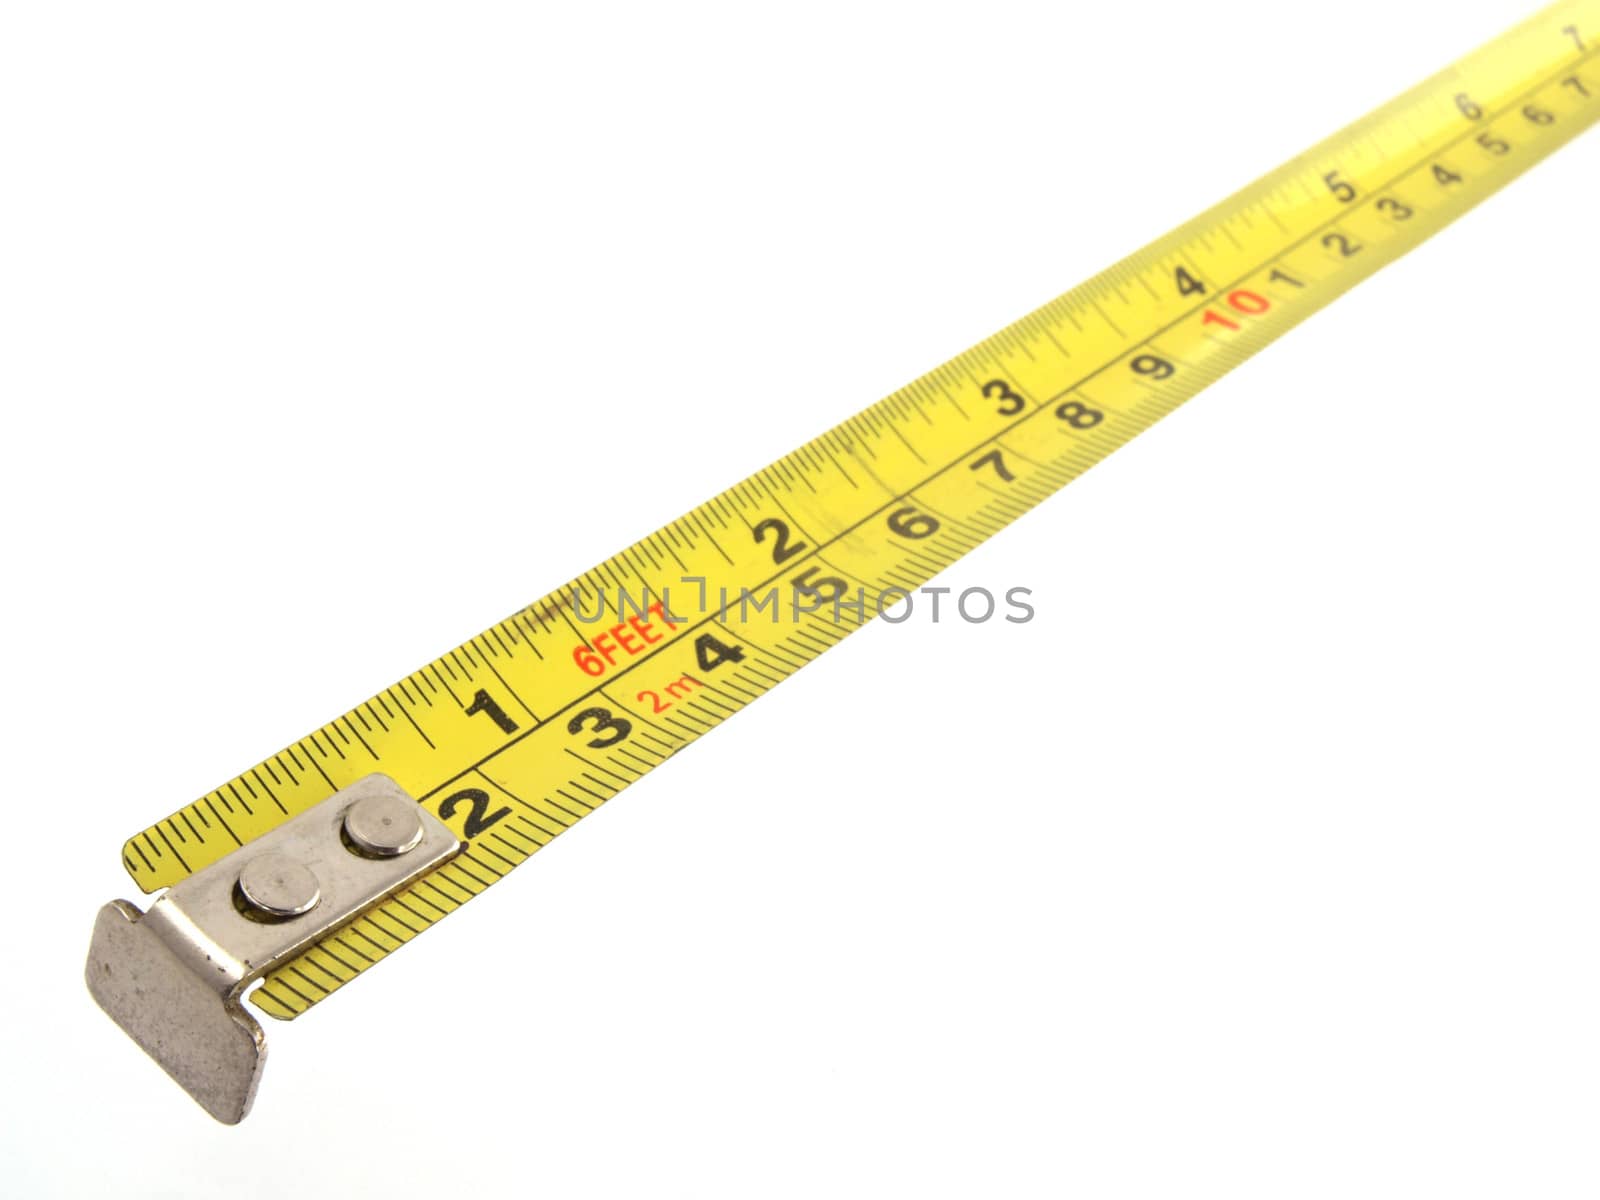 Close up photo of a yellow tape measure by ianlangley